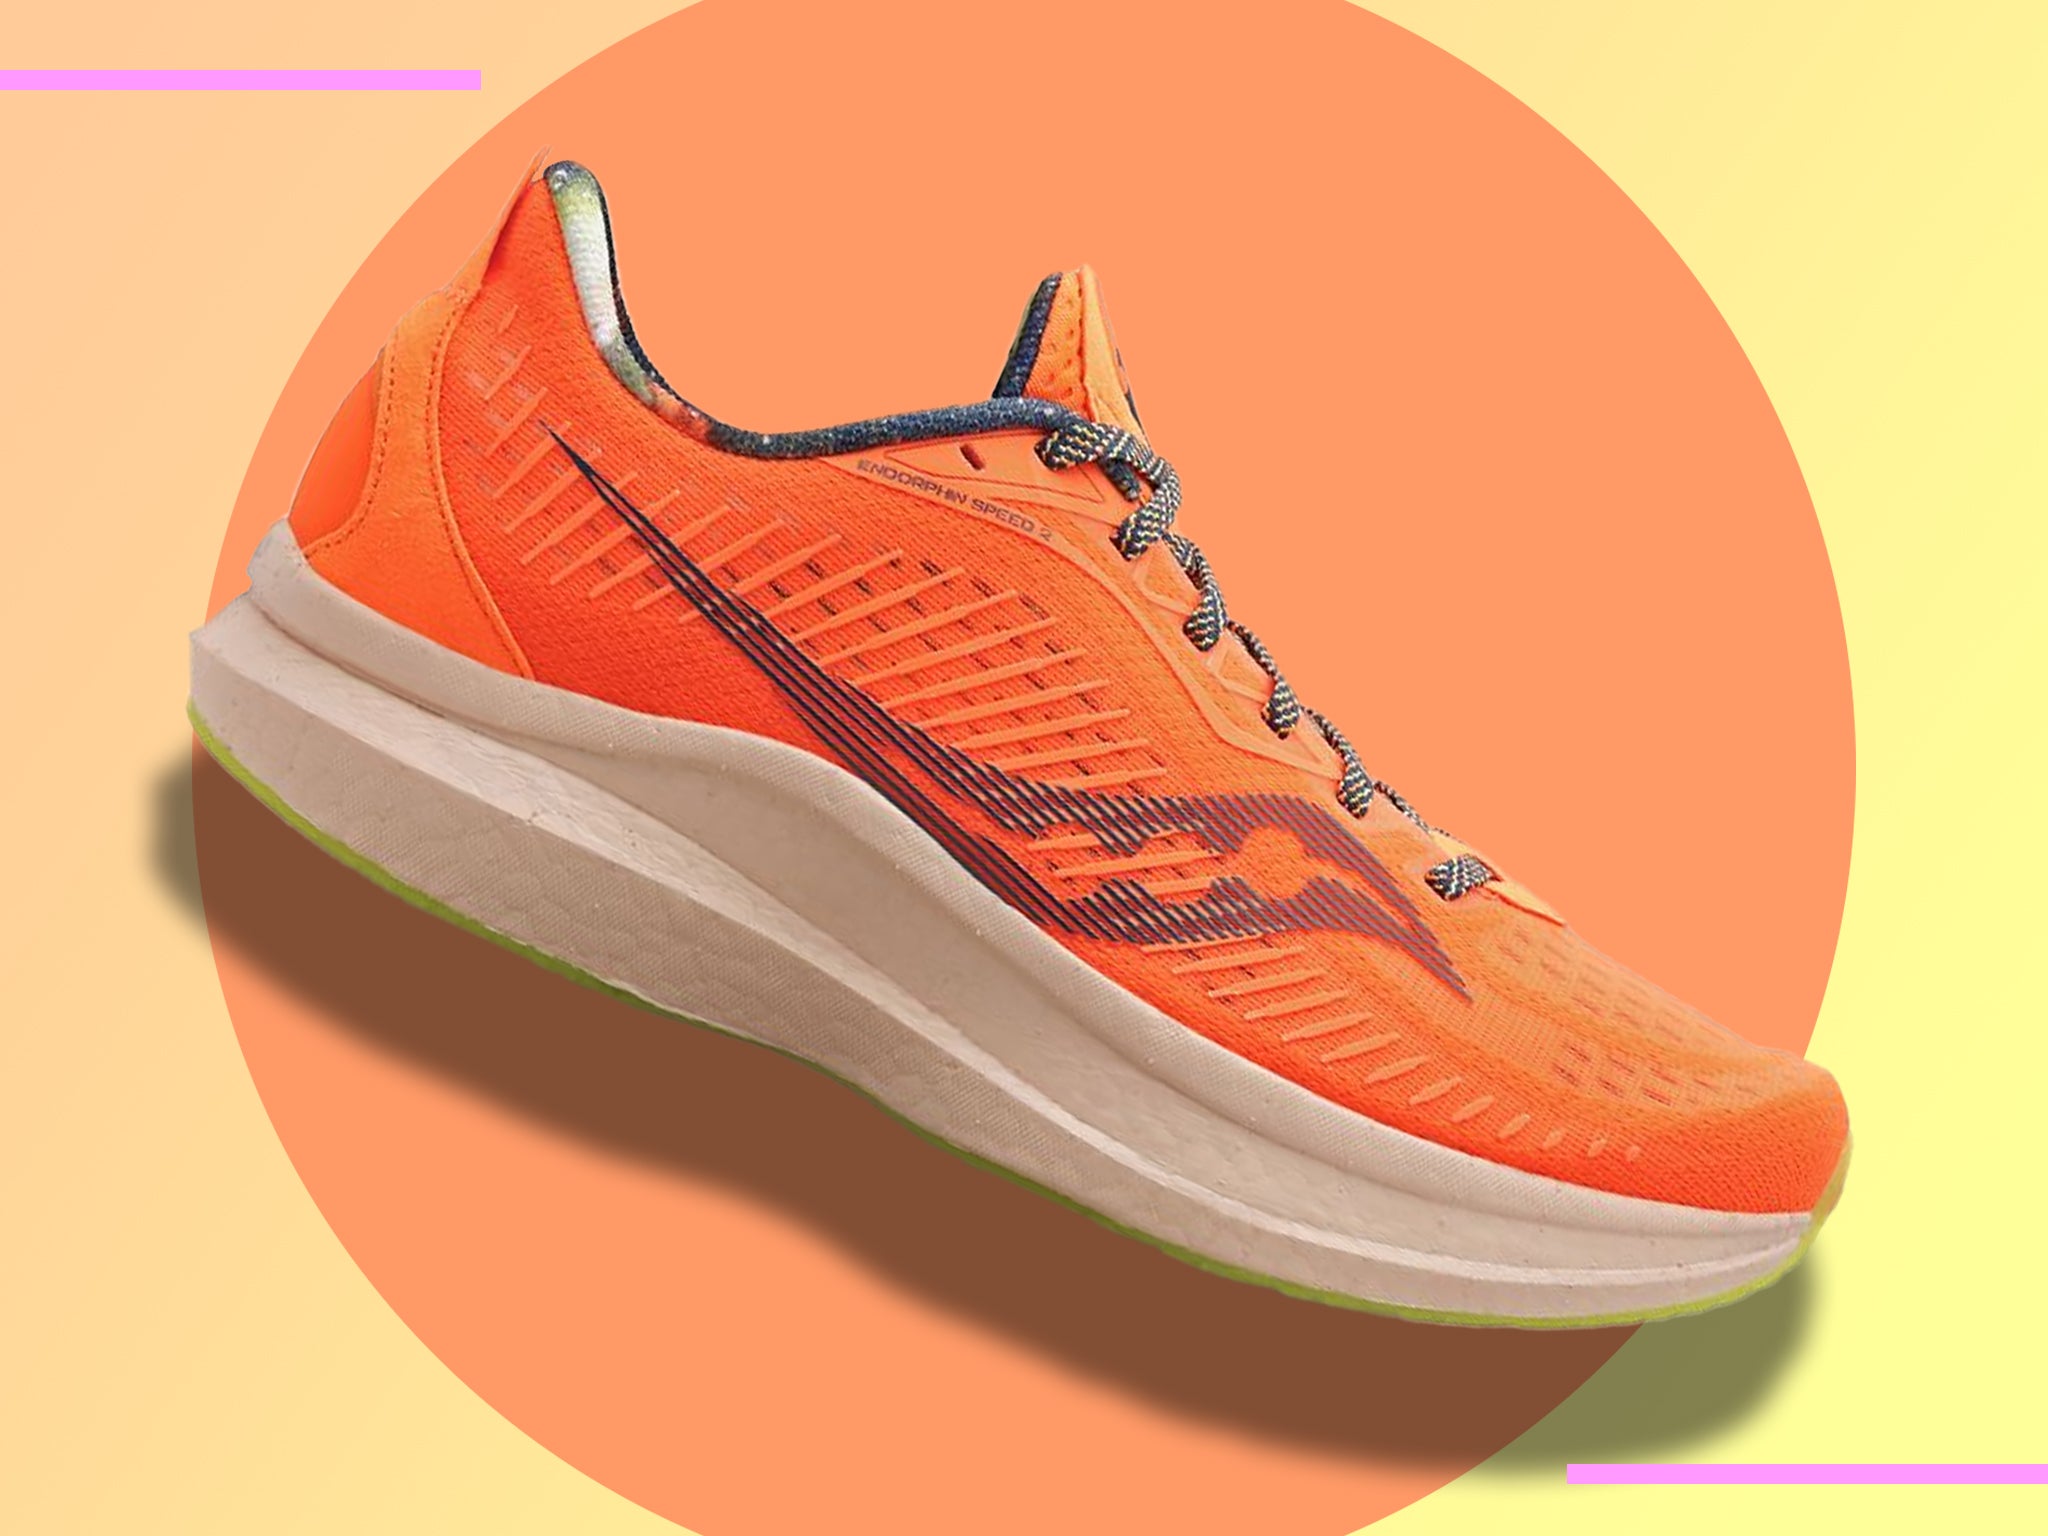 The newest version boasts a better heel fit and mesh breathability